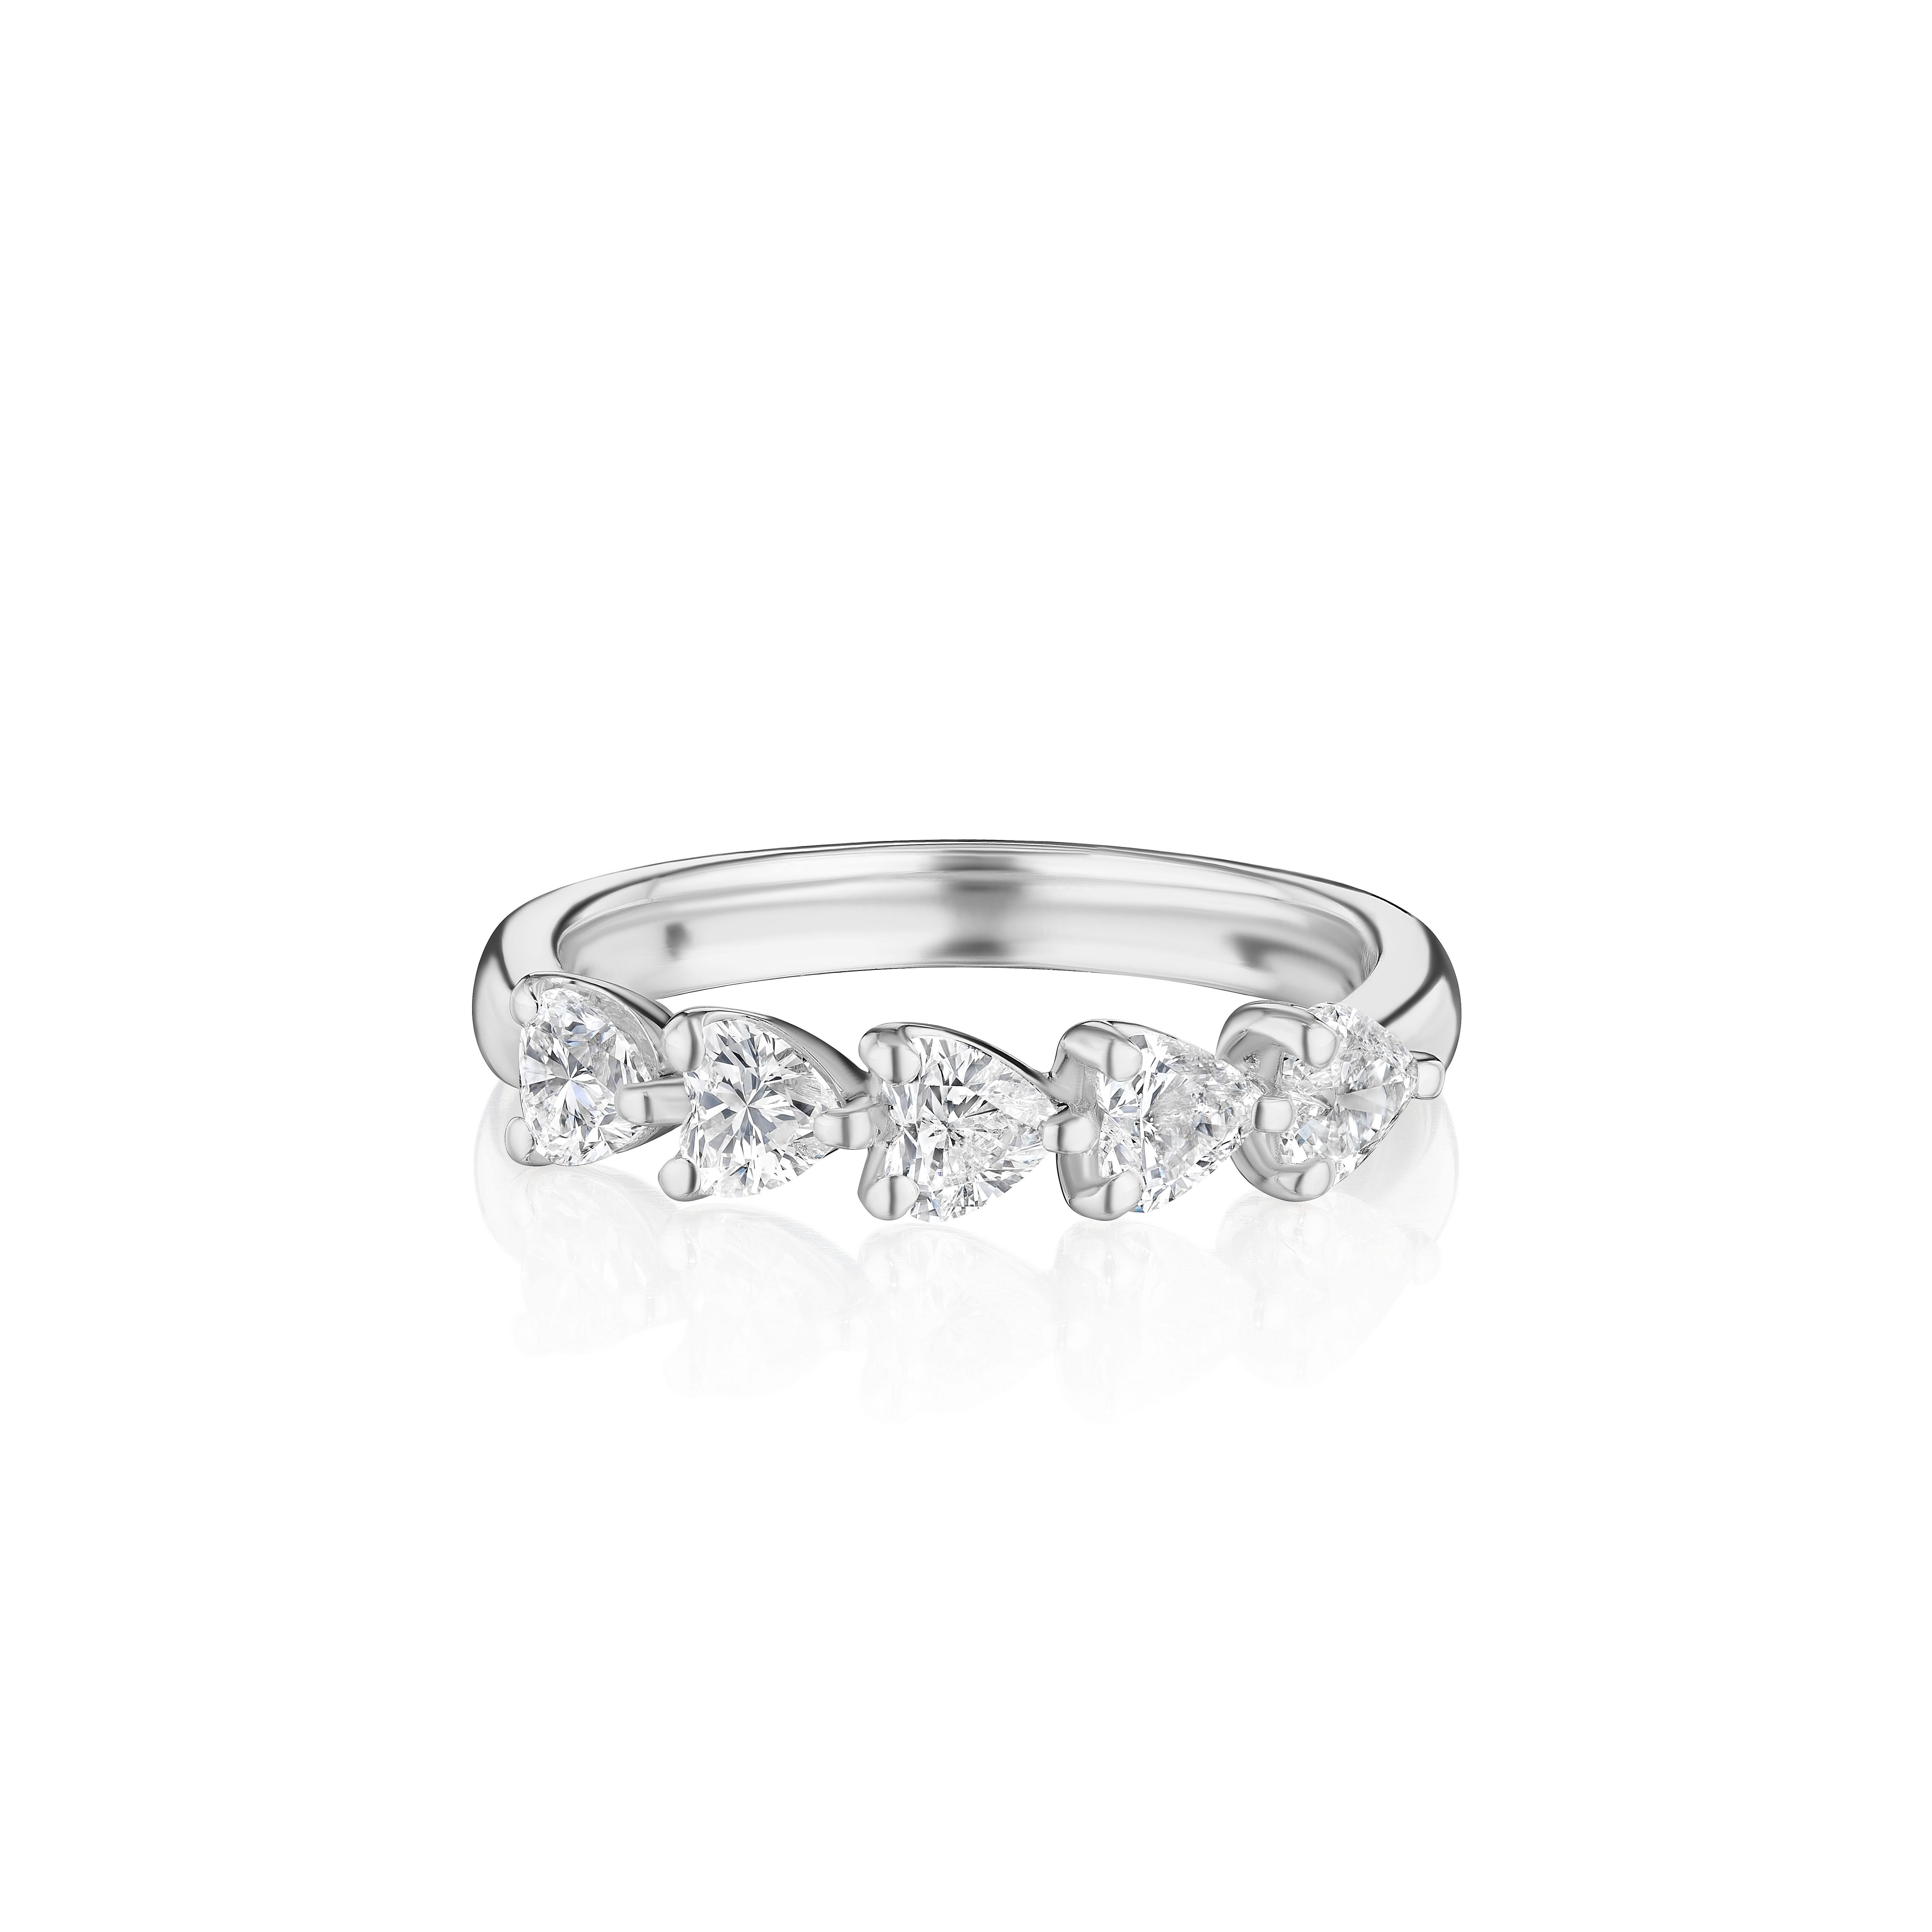 Crafted in 18KT gold, this band is made with 5 heart shape diamonds which encircle the finger, and has a combining total weight of approximately 1.00 carat. The diamonds are set east to west in a shared prong setting. Worn beautifully on its own or